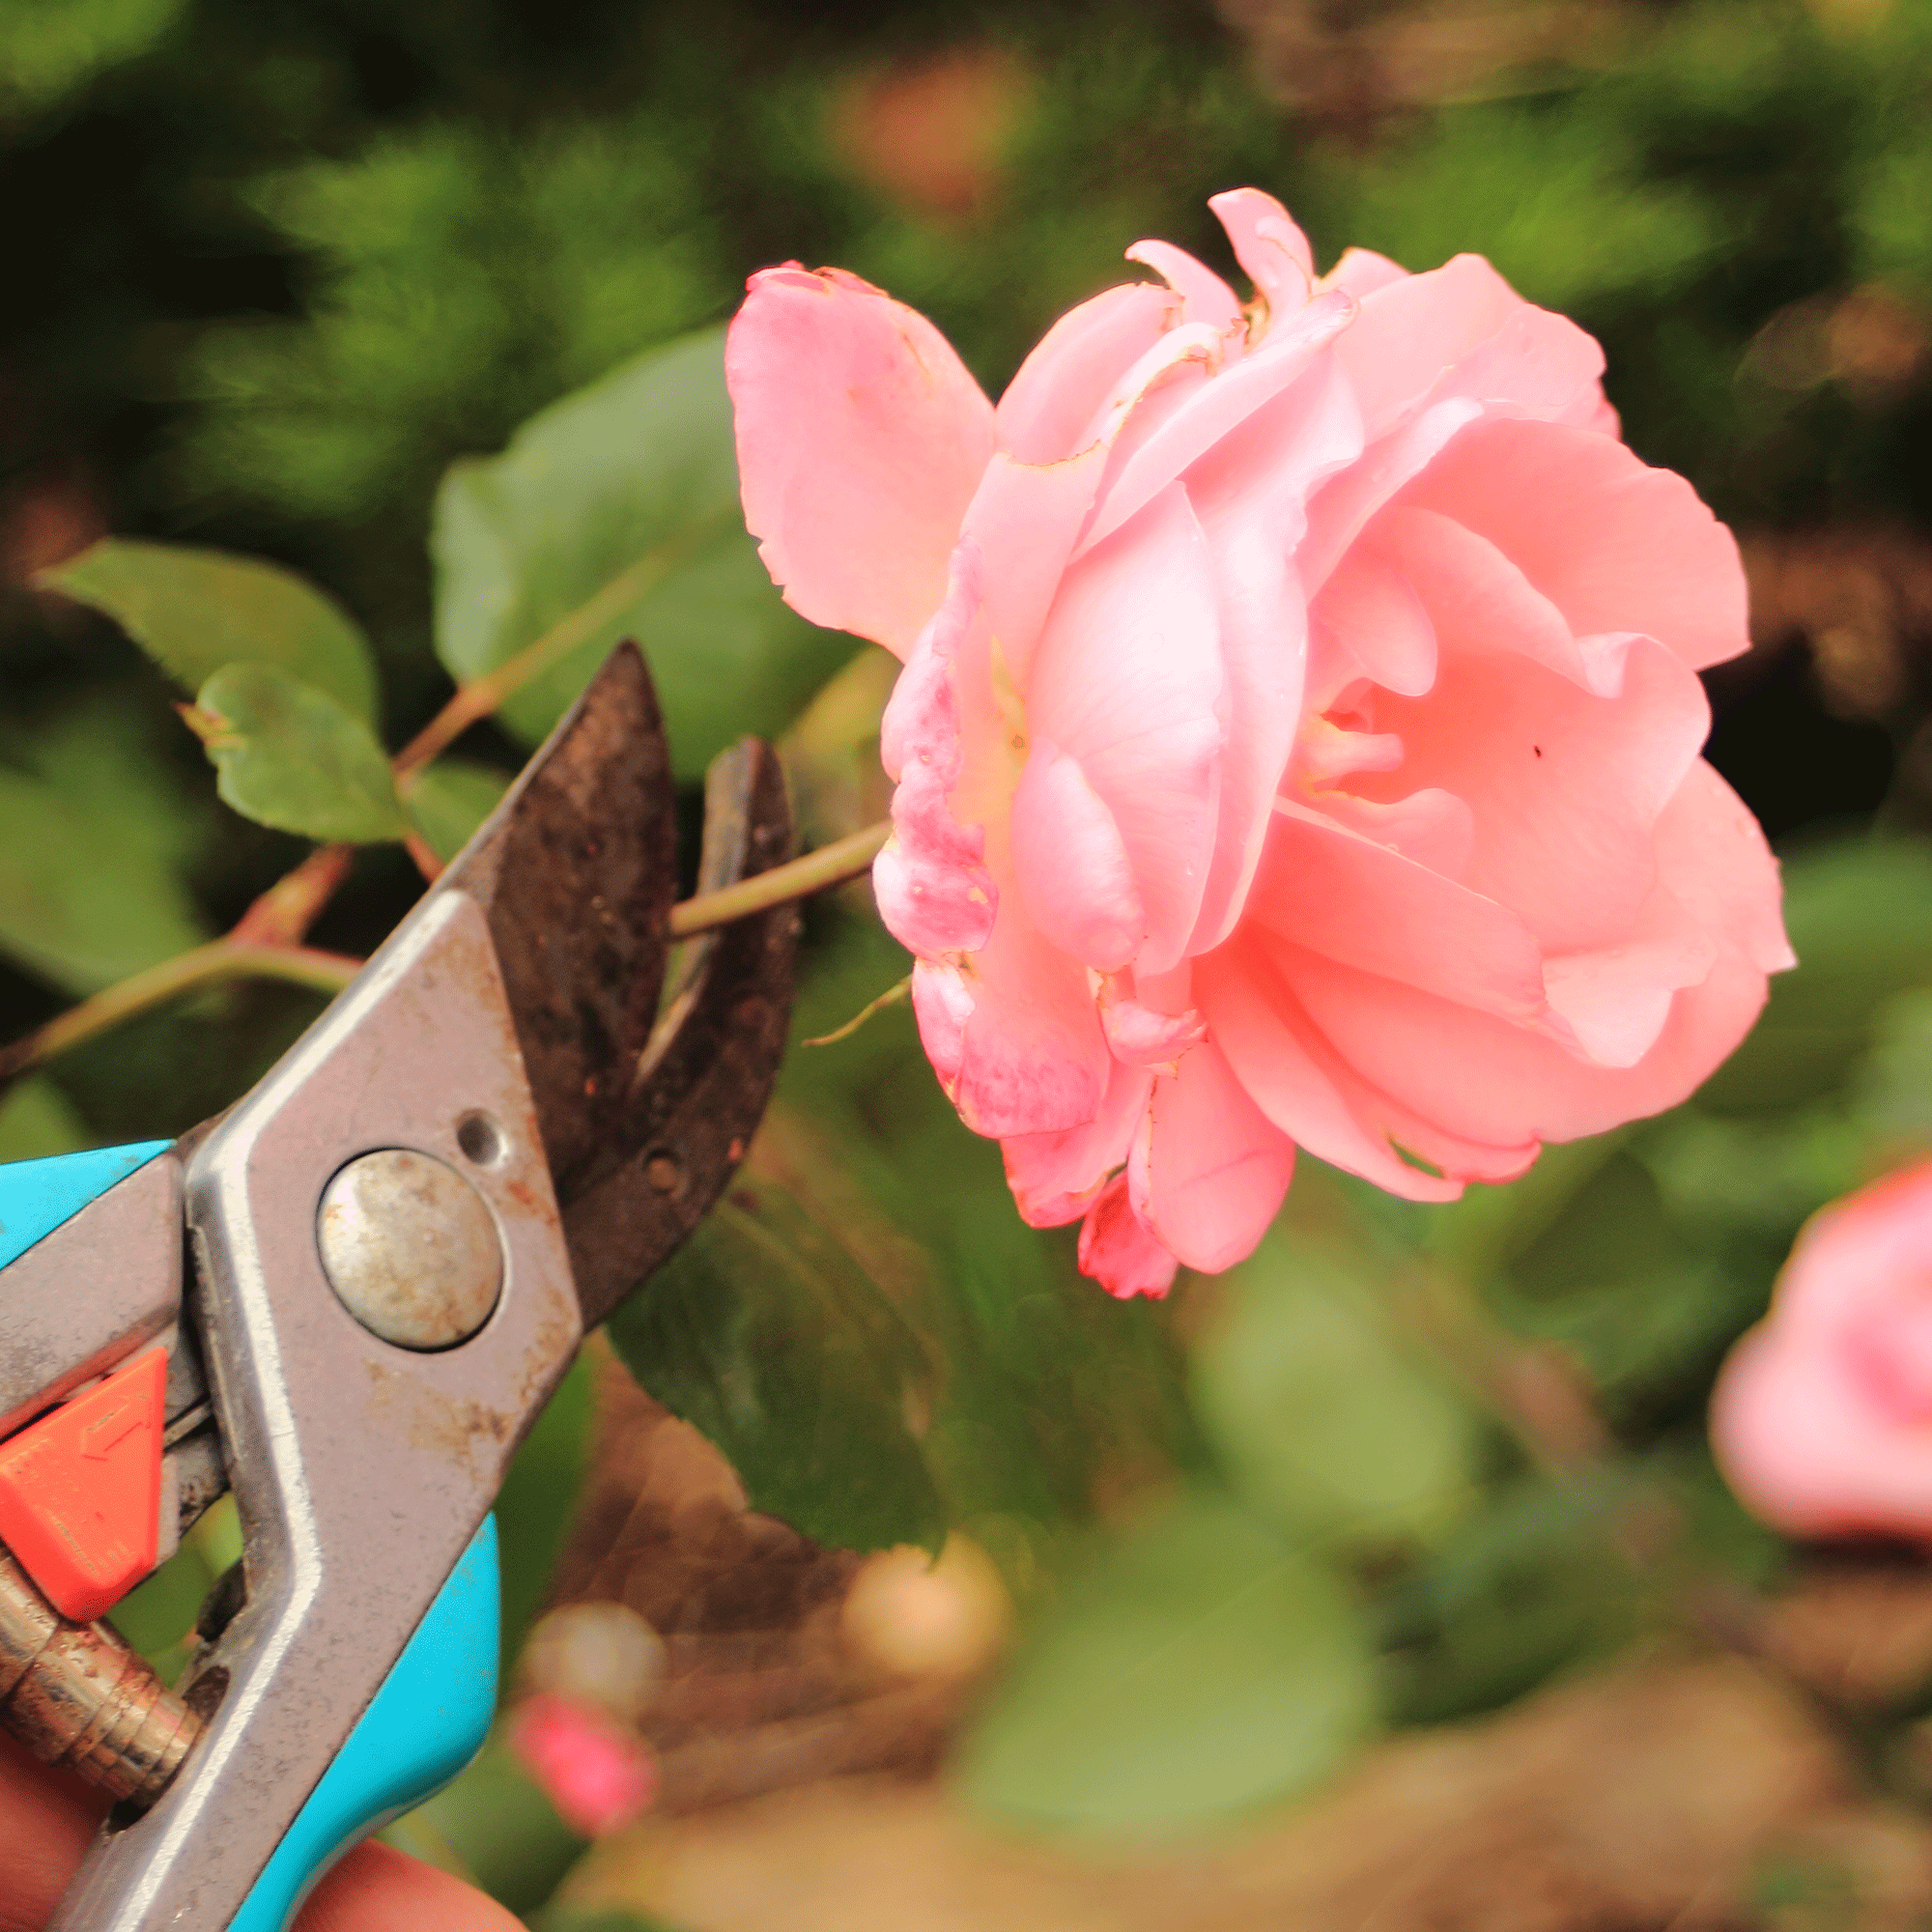 How to deadhead roses - experts explain the trick to keep your roses blooming